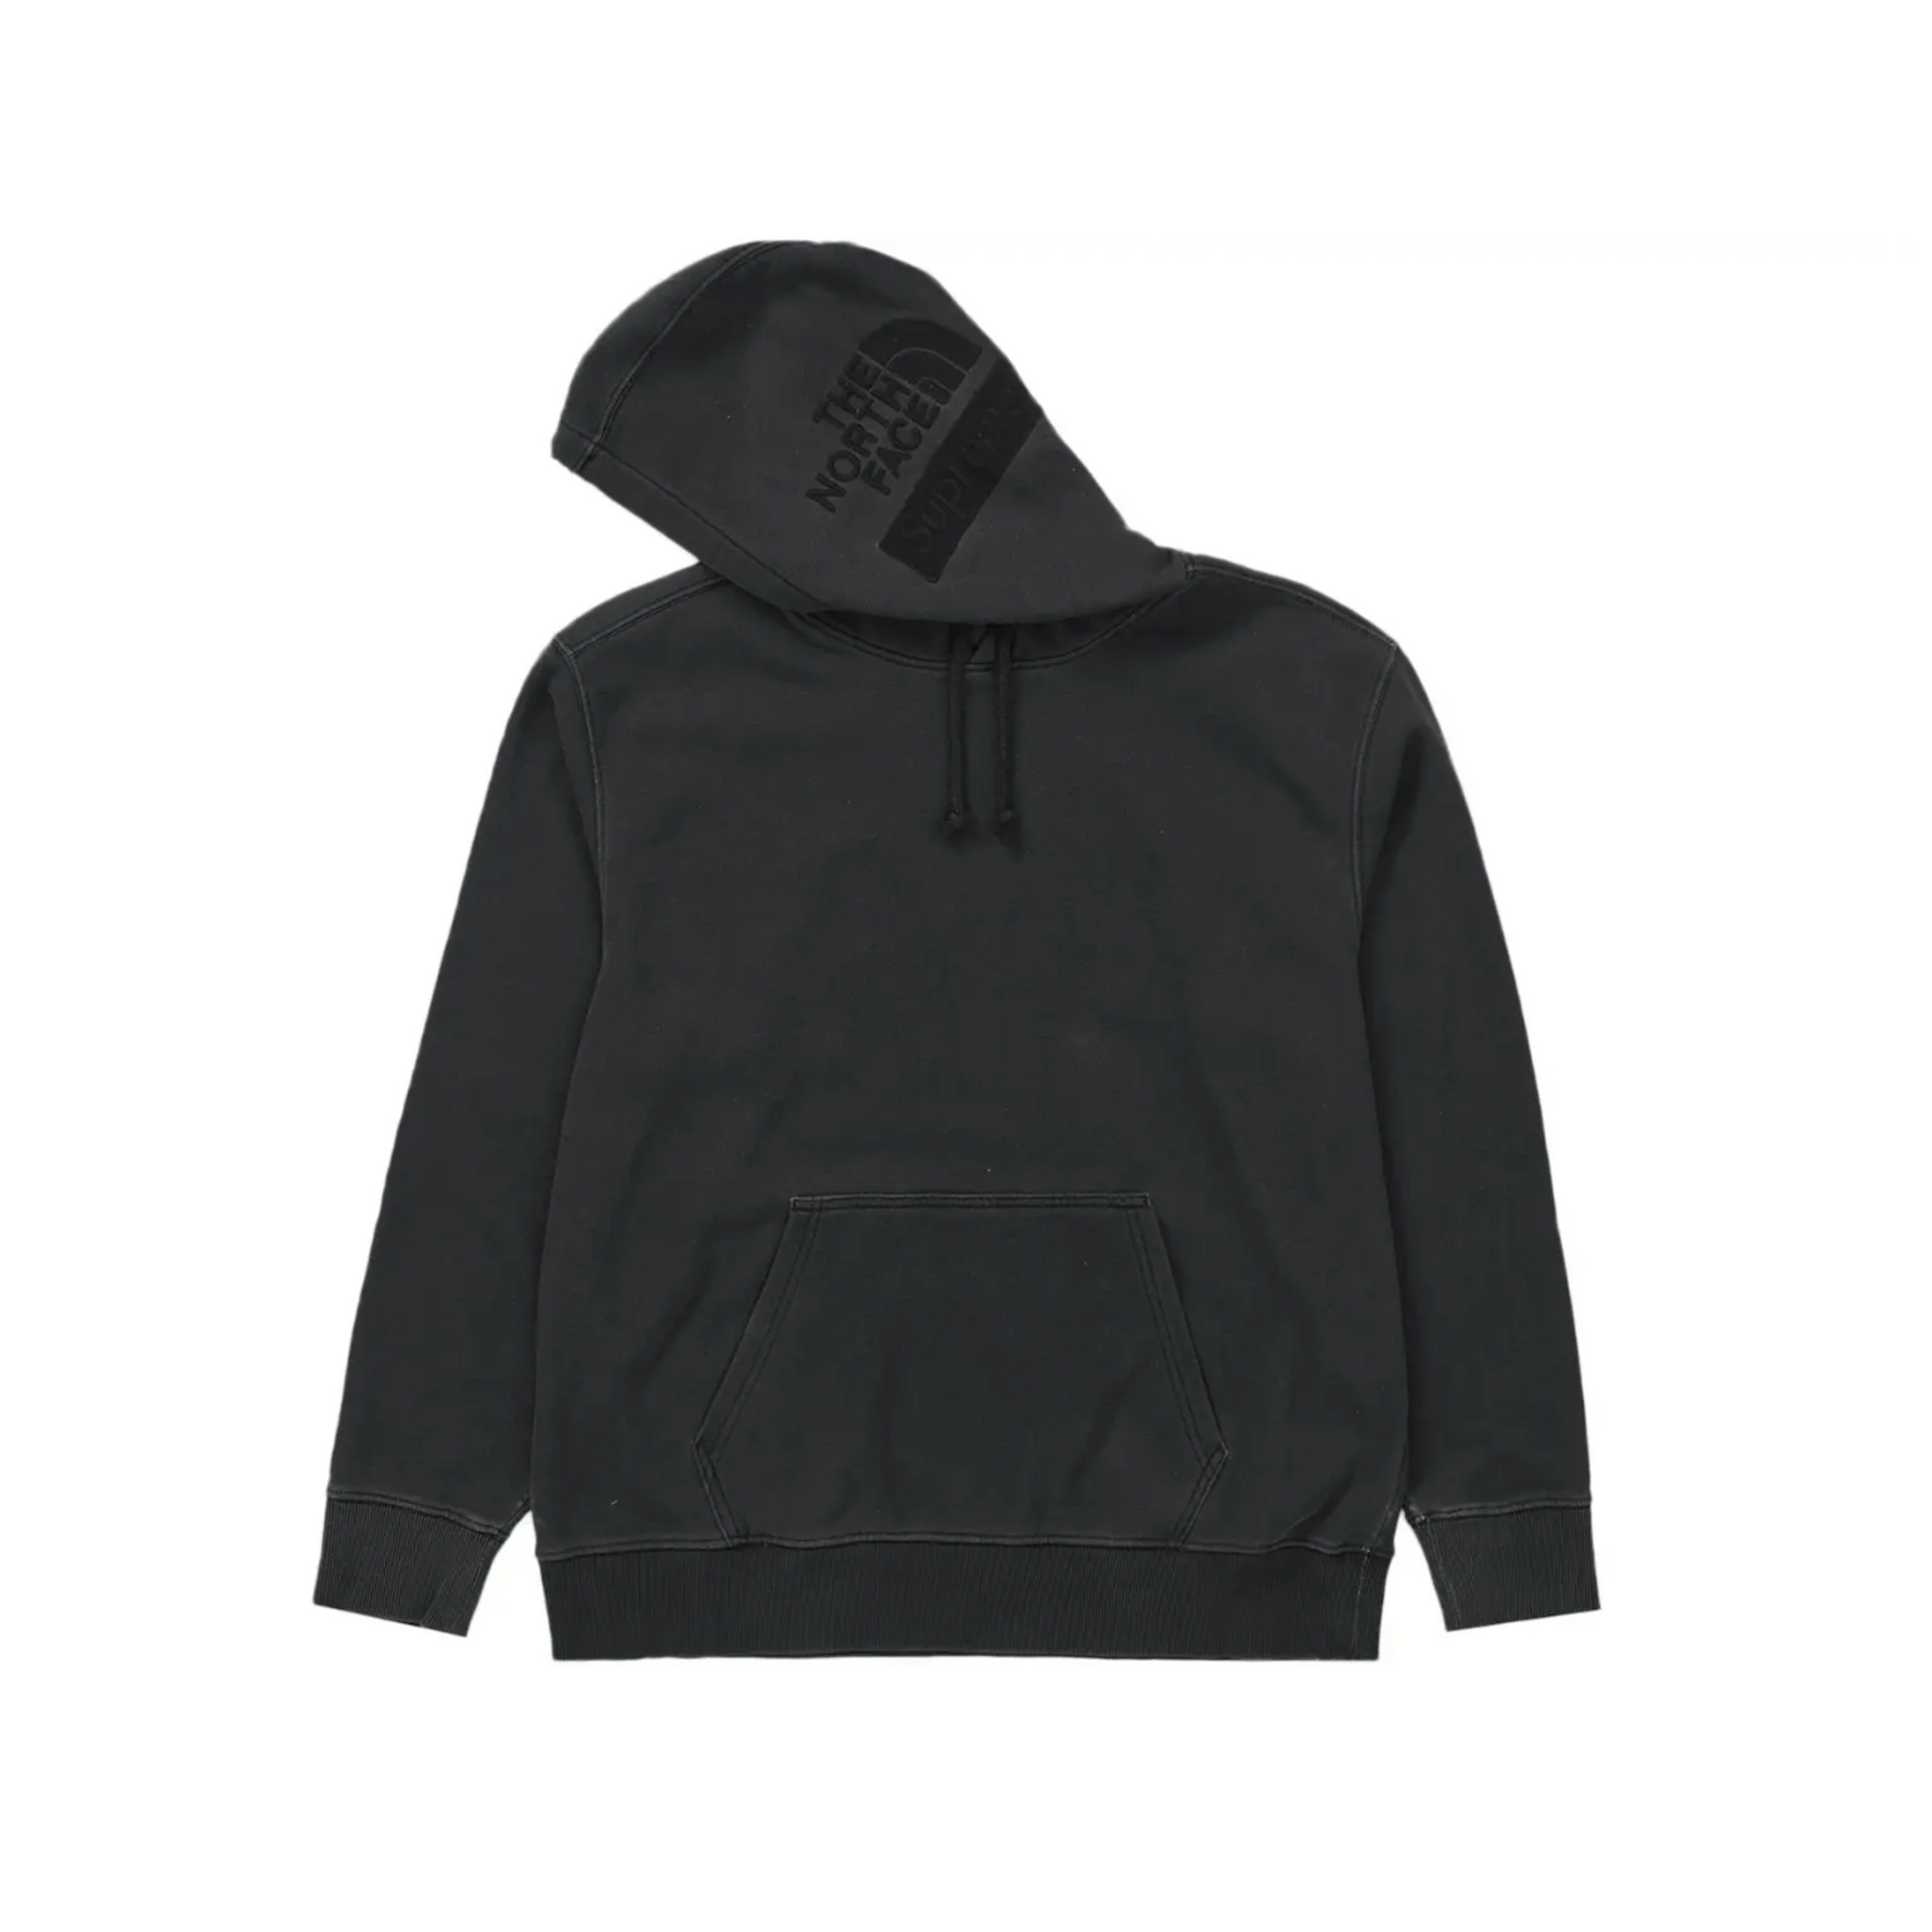 Supreme The North Face Hooded Sweatshirt - The Global Hype